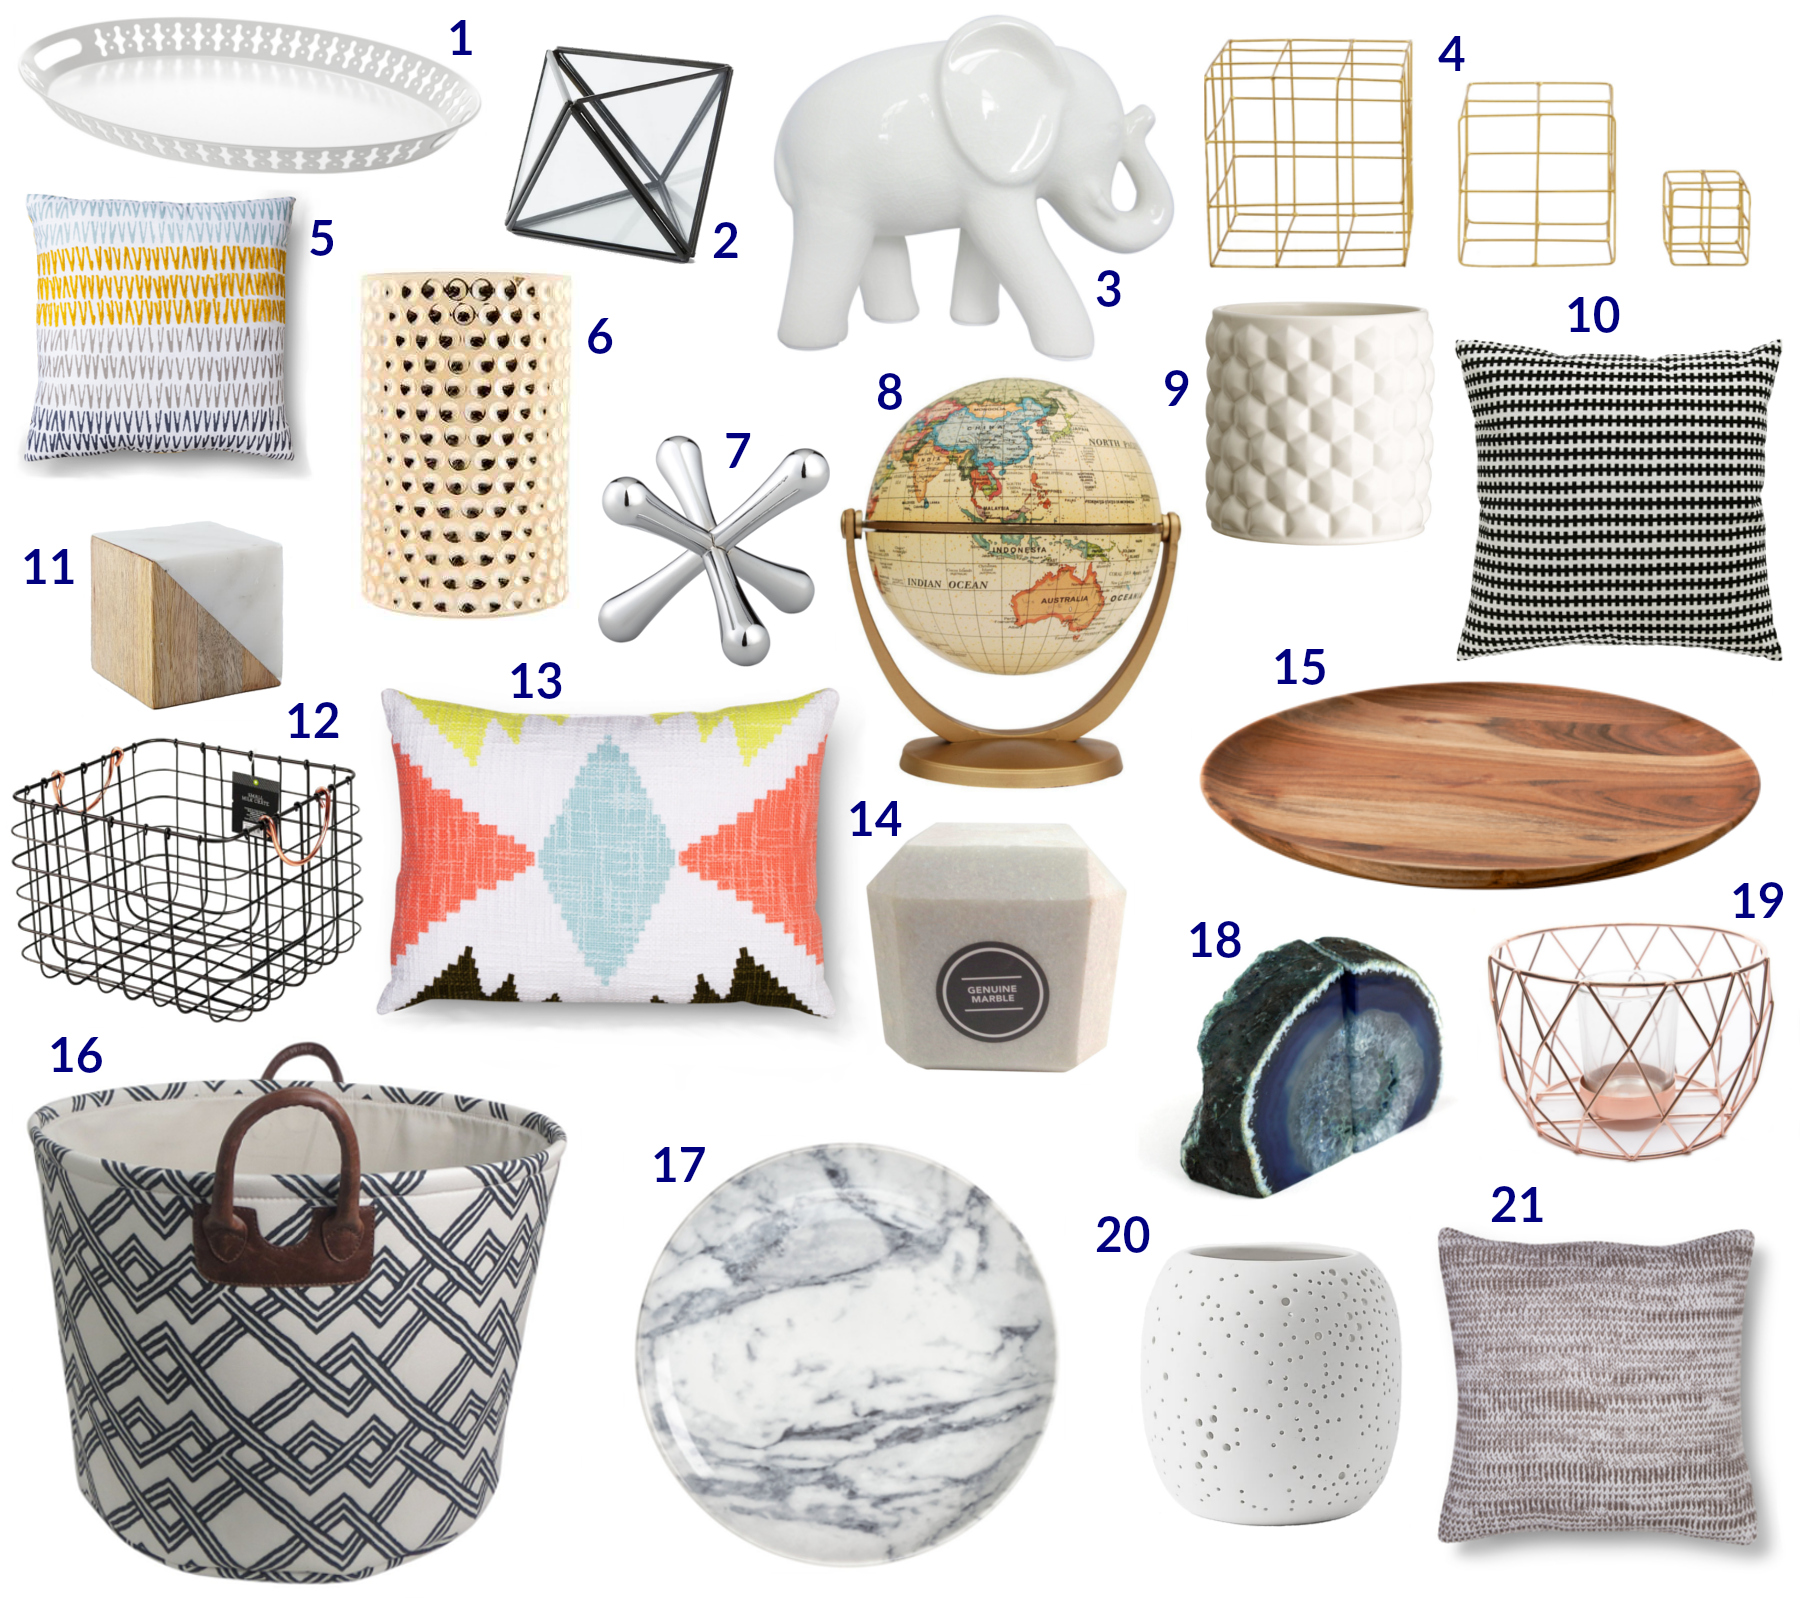 5 Decor Items To Buy in Your 20s